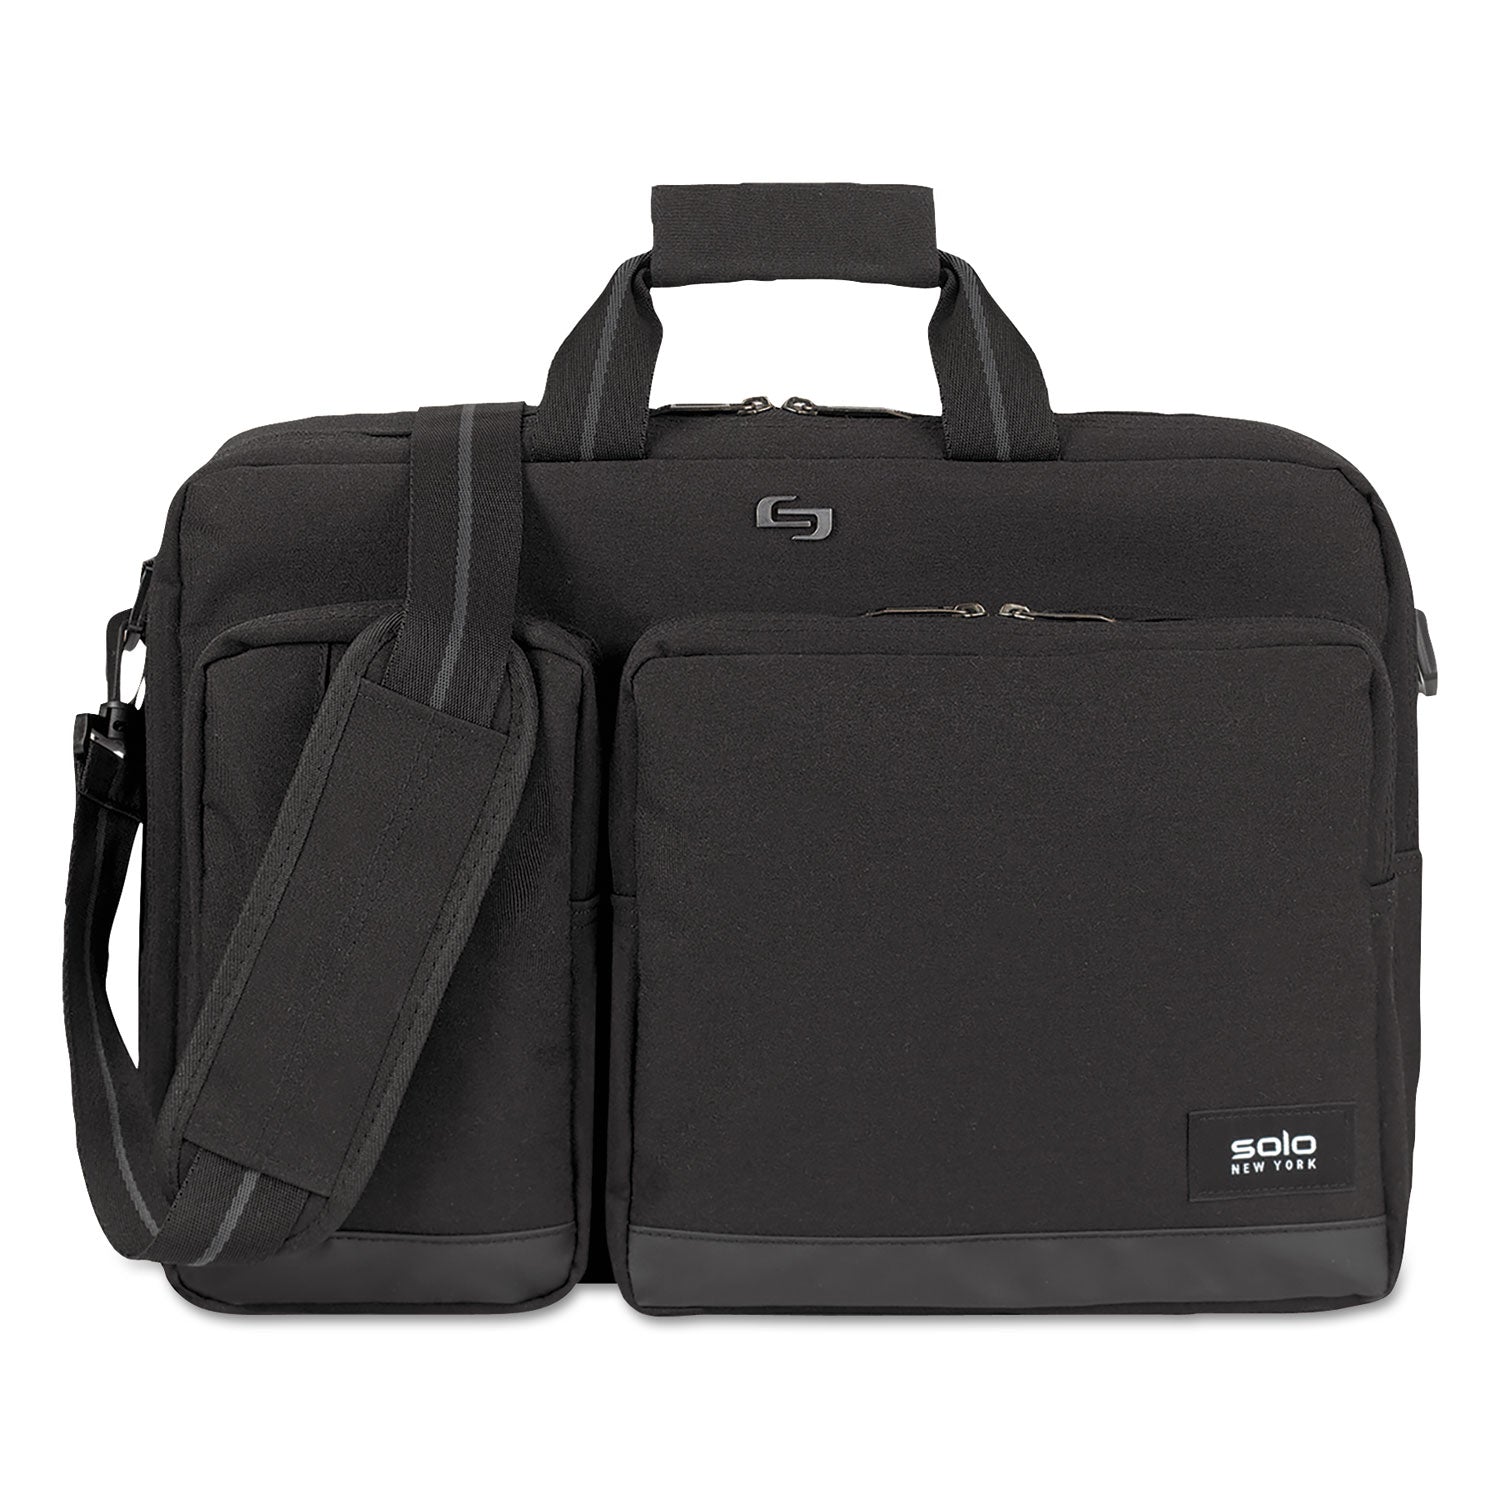 urban-hybrid-briefcase-fits-devices-up-to-156-polyester-5-x-1725-x-1724-black_uslubn3104 - 1